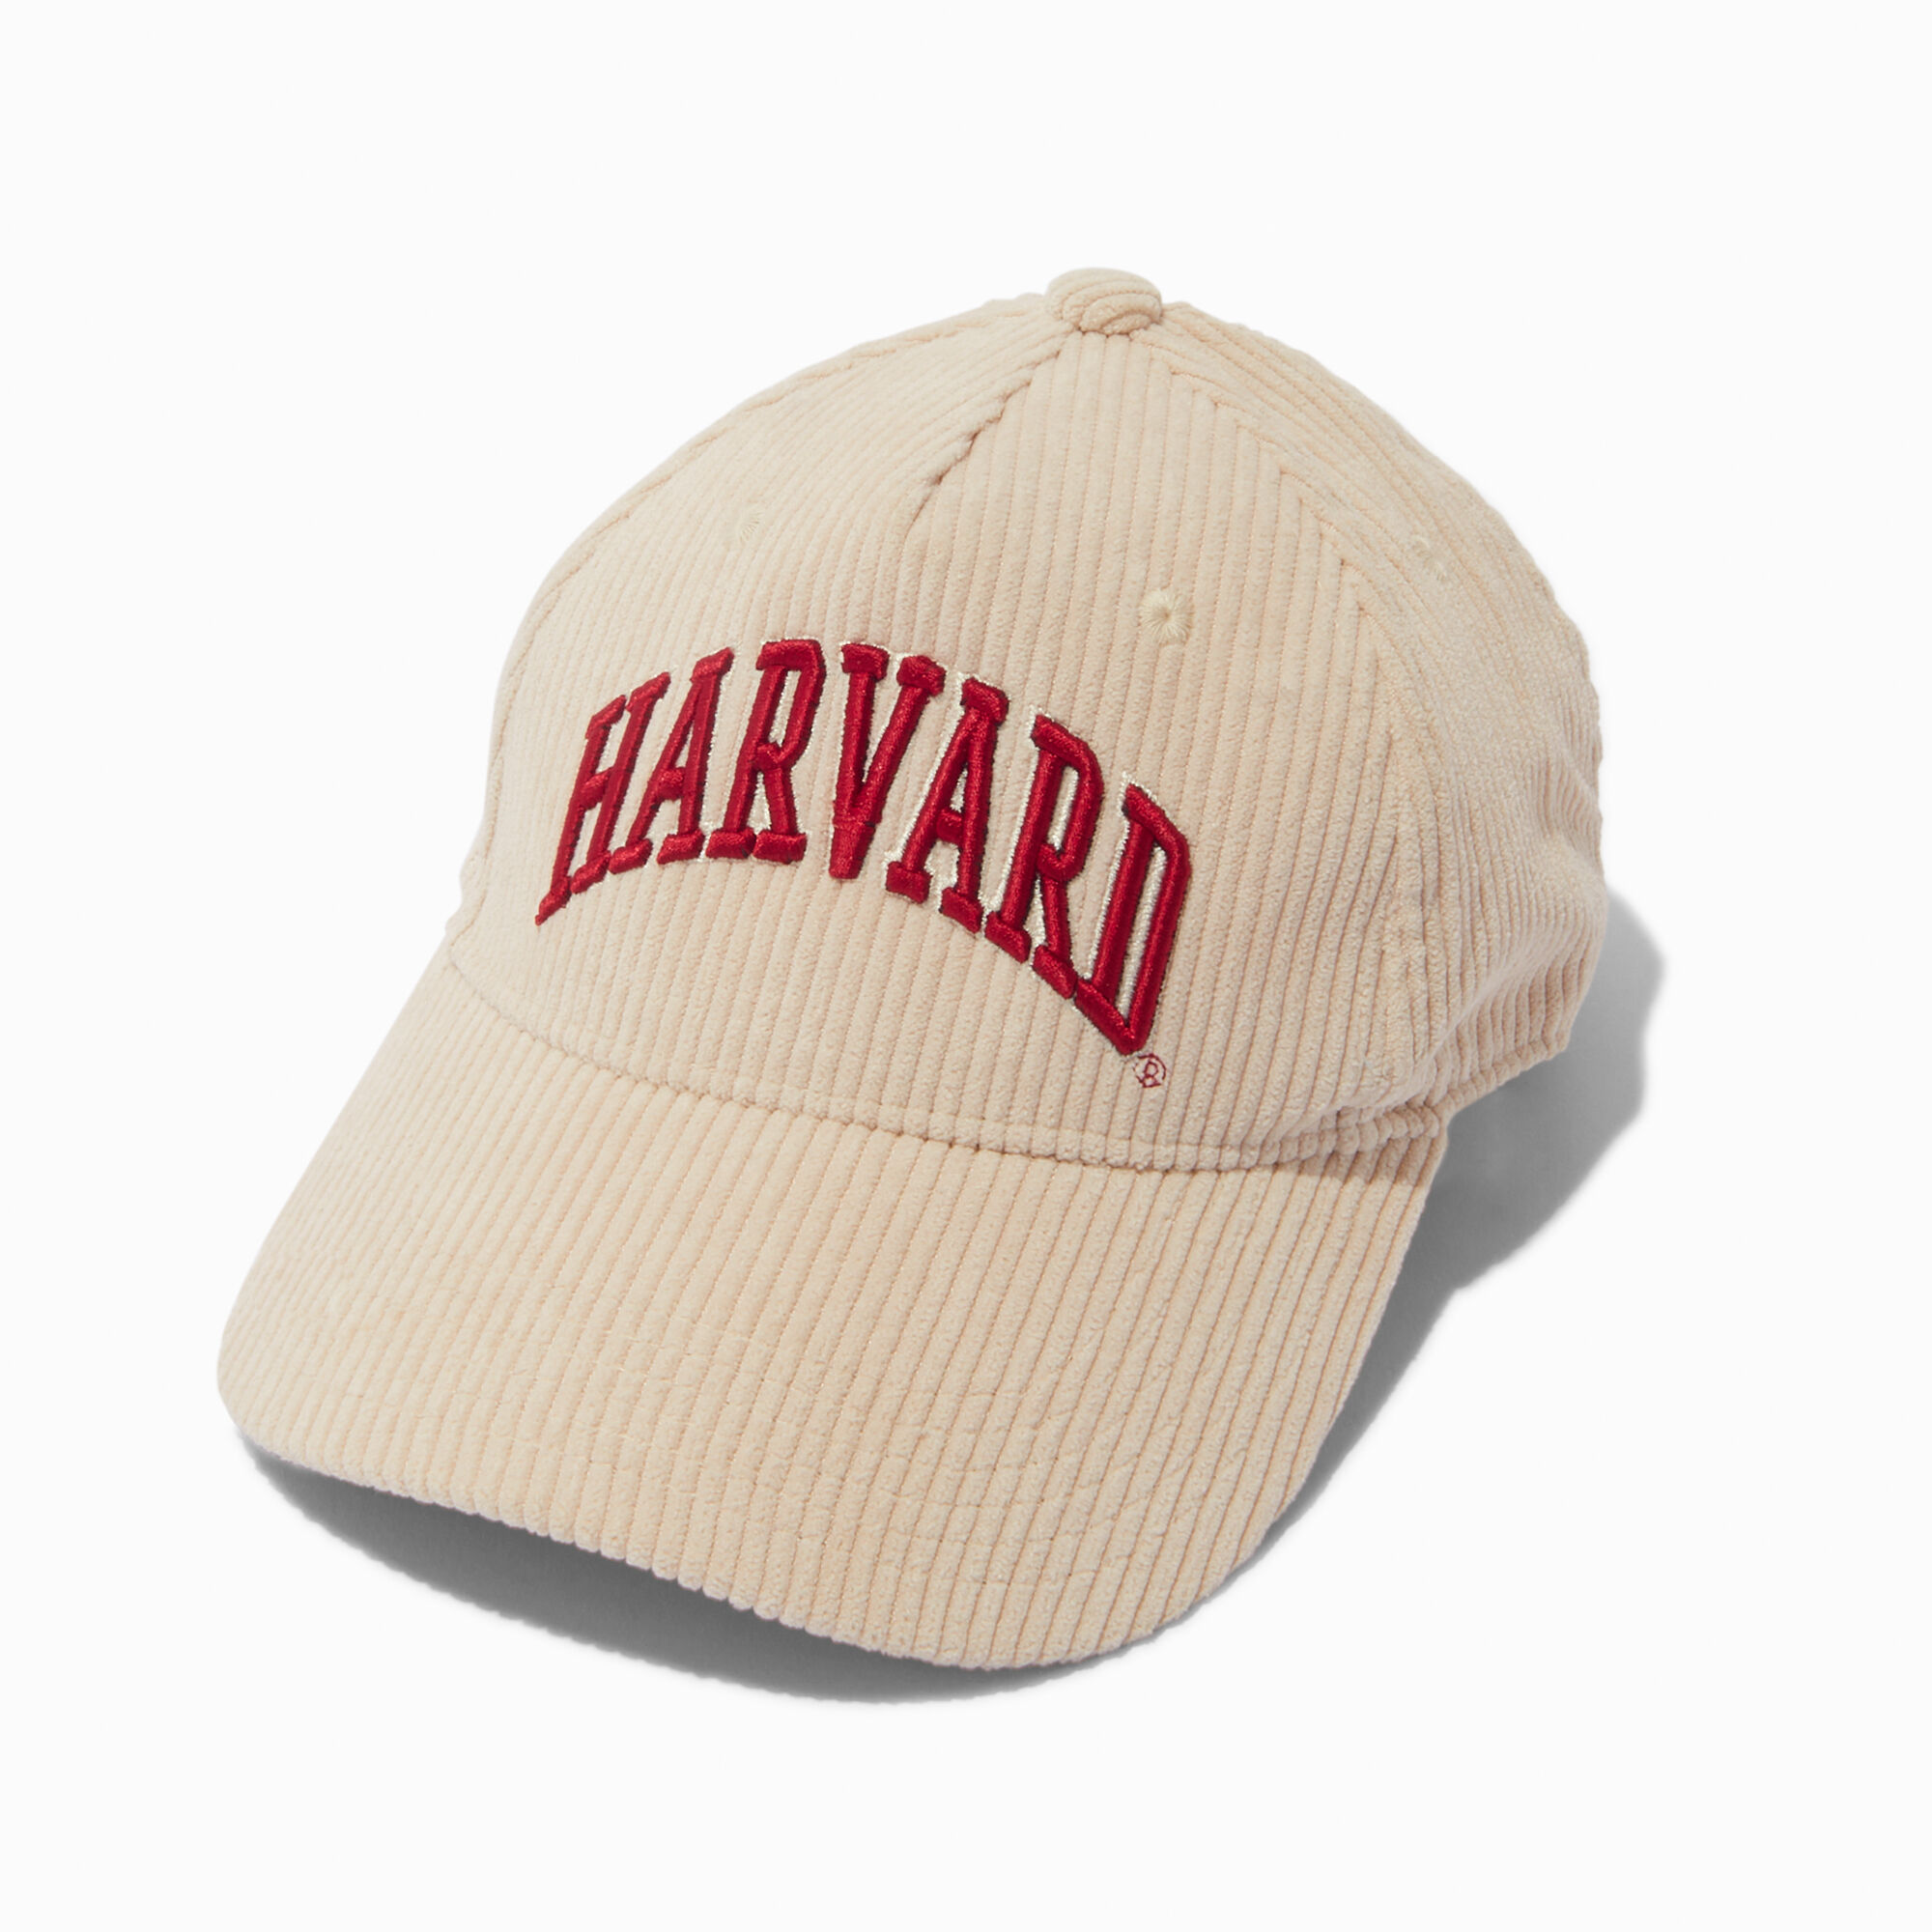 View Claires Harvard Baseball Hat information